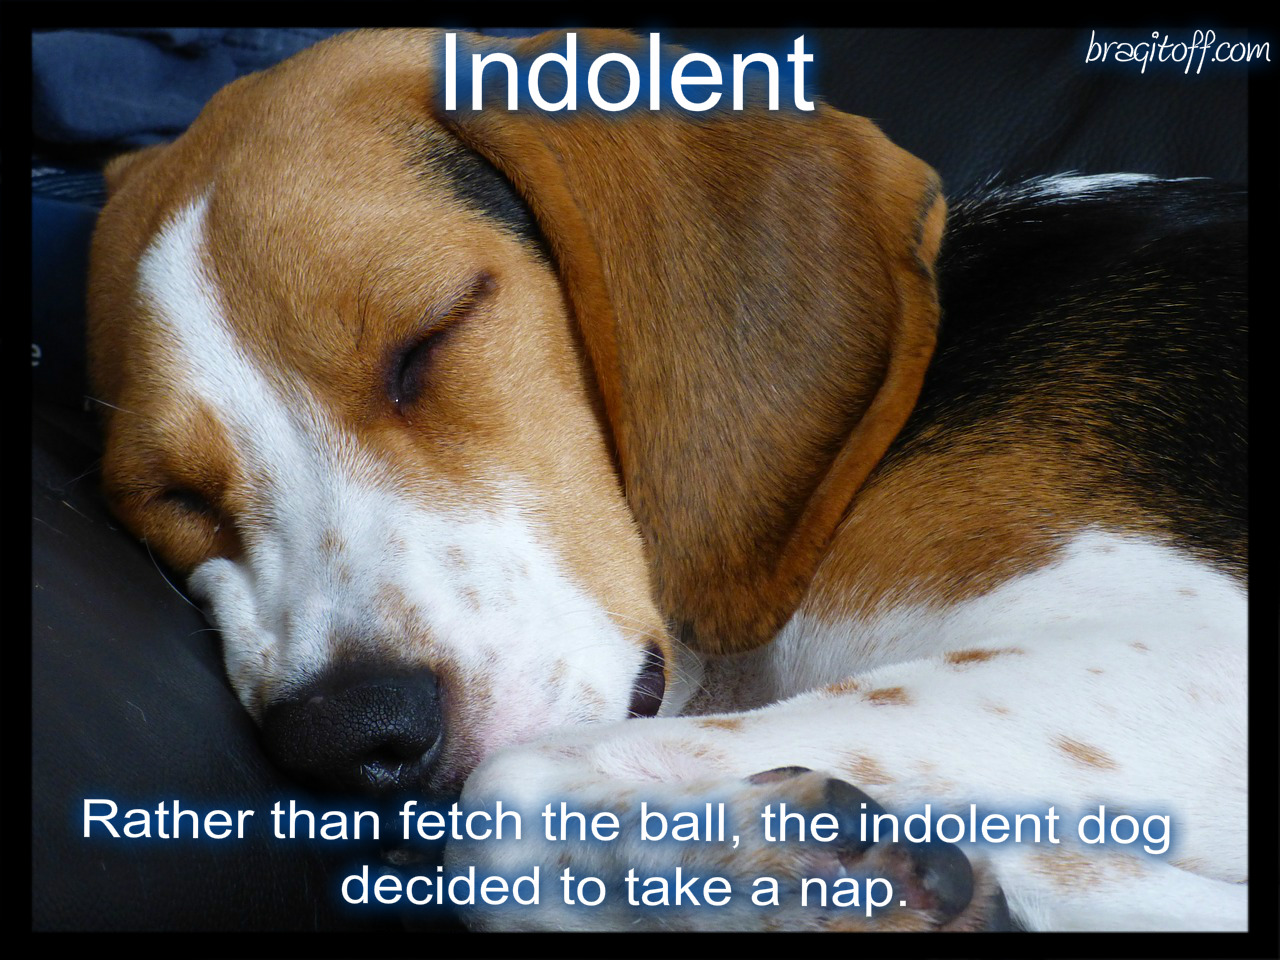 image sentence: Rather than fetch the ball, the indolent dog decided to take a nap.  